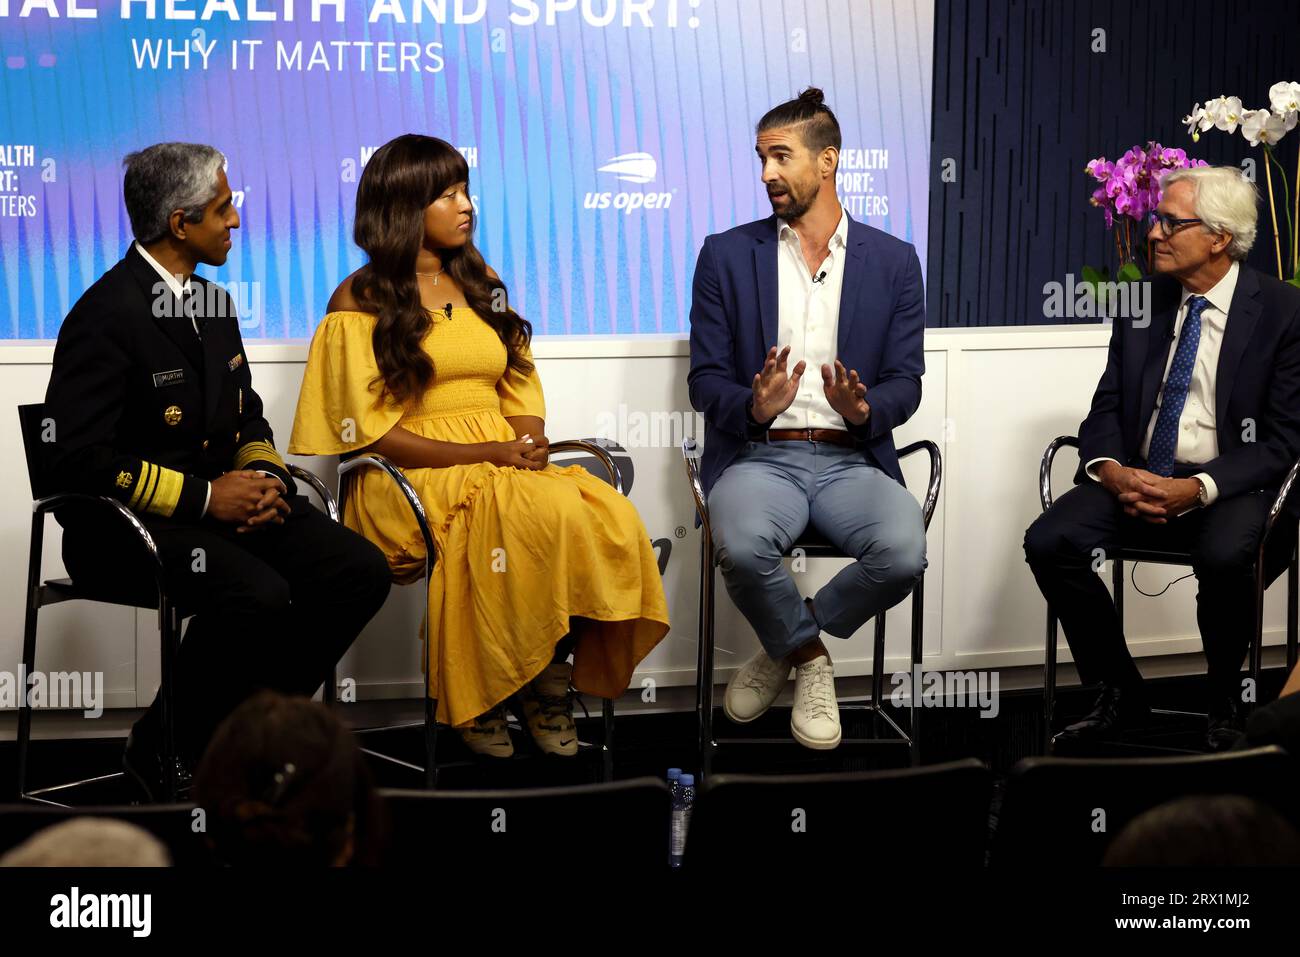 Mental Health and Sport Press conference at US Open on 6 September 2023.  From Left to Right:  US Surgeon General  Dr. Vivek H. Murthy, Naomi Osaka, Michael Phelps, Dr. Brian Hainline Stock Photo